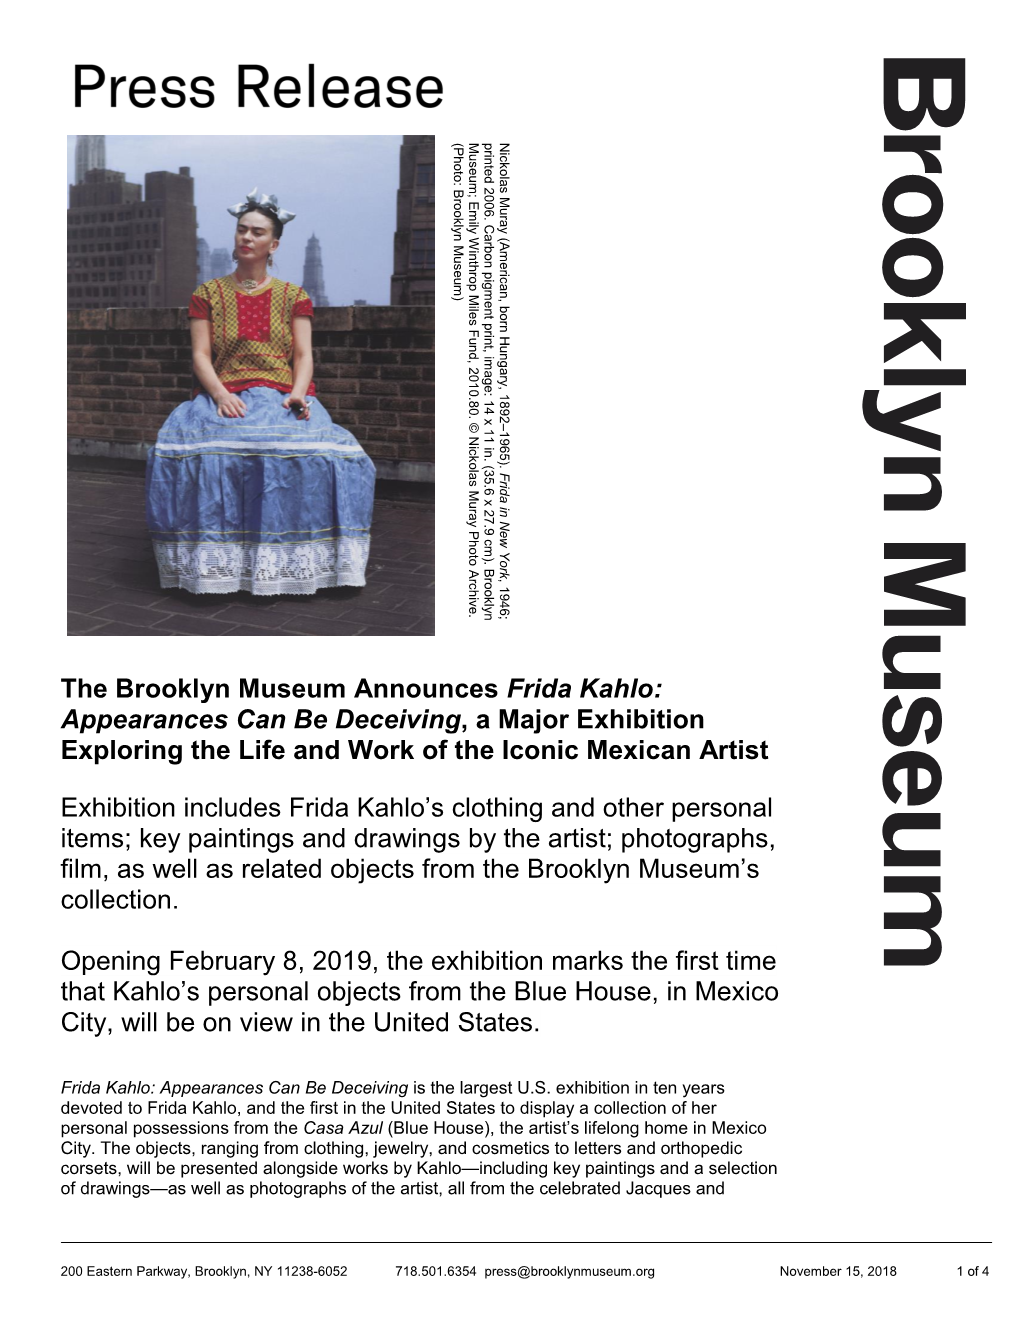 The Brooklyn Museum Announces Frida Kahlo: Appearances Can Be Deceiving, a Major Exhibition Exploring the Life and Work of the Iconic Mexican Artist